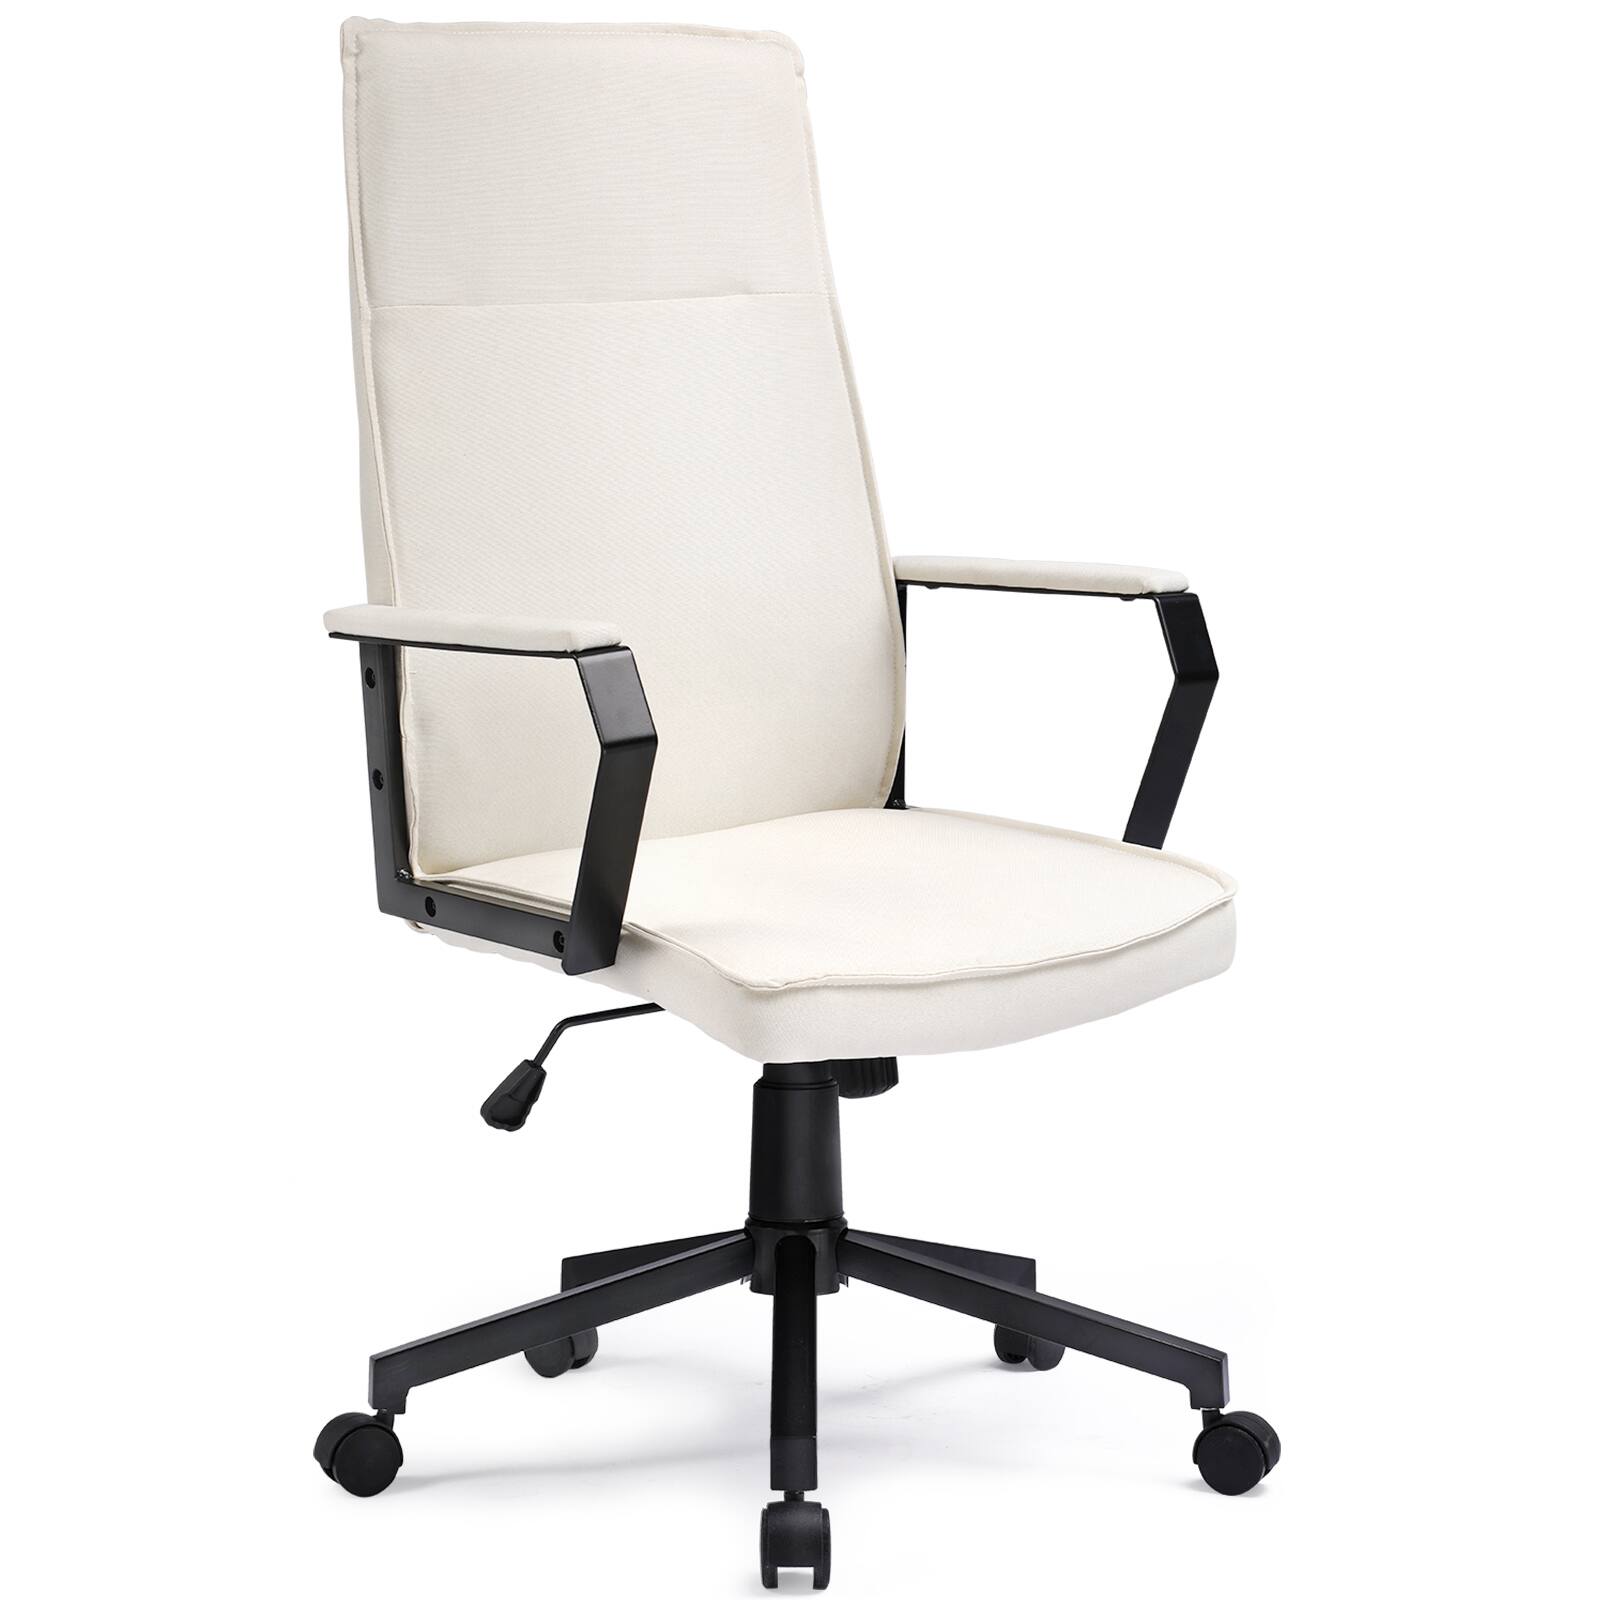 ComHoma Swivel Office Chair (High Back, Ergonomic, Adjustable) for $49.84 + Free Shipping